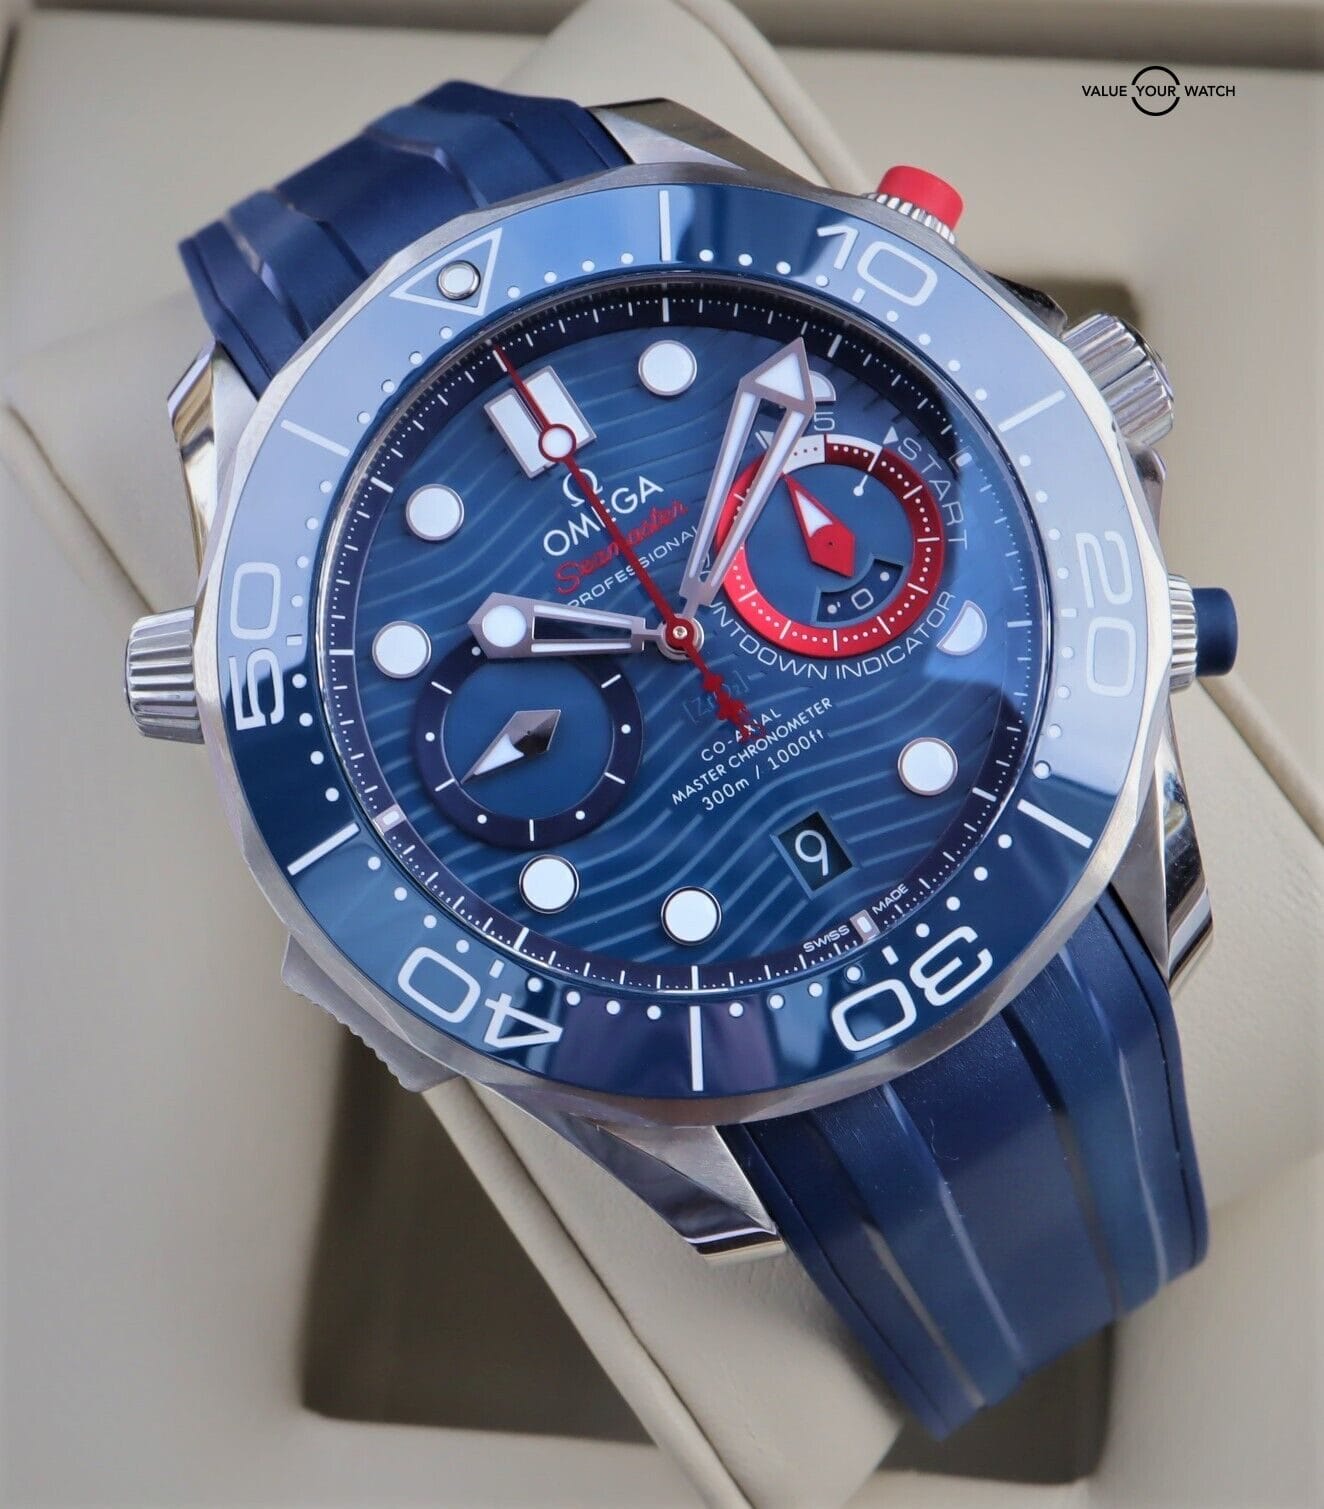 Omega Seamaster Diver 300M Chronograph America's Cup 210.30.44.51.03.002  Omega Watch Review 